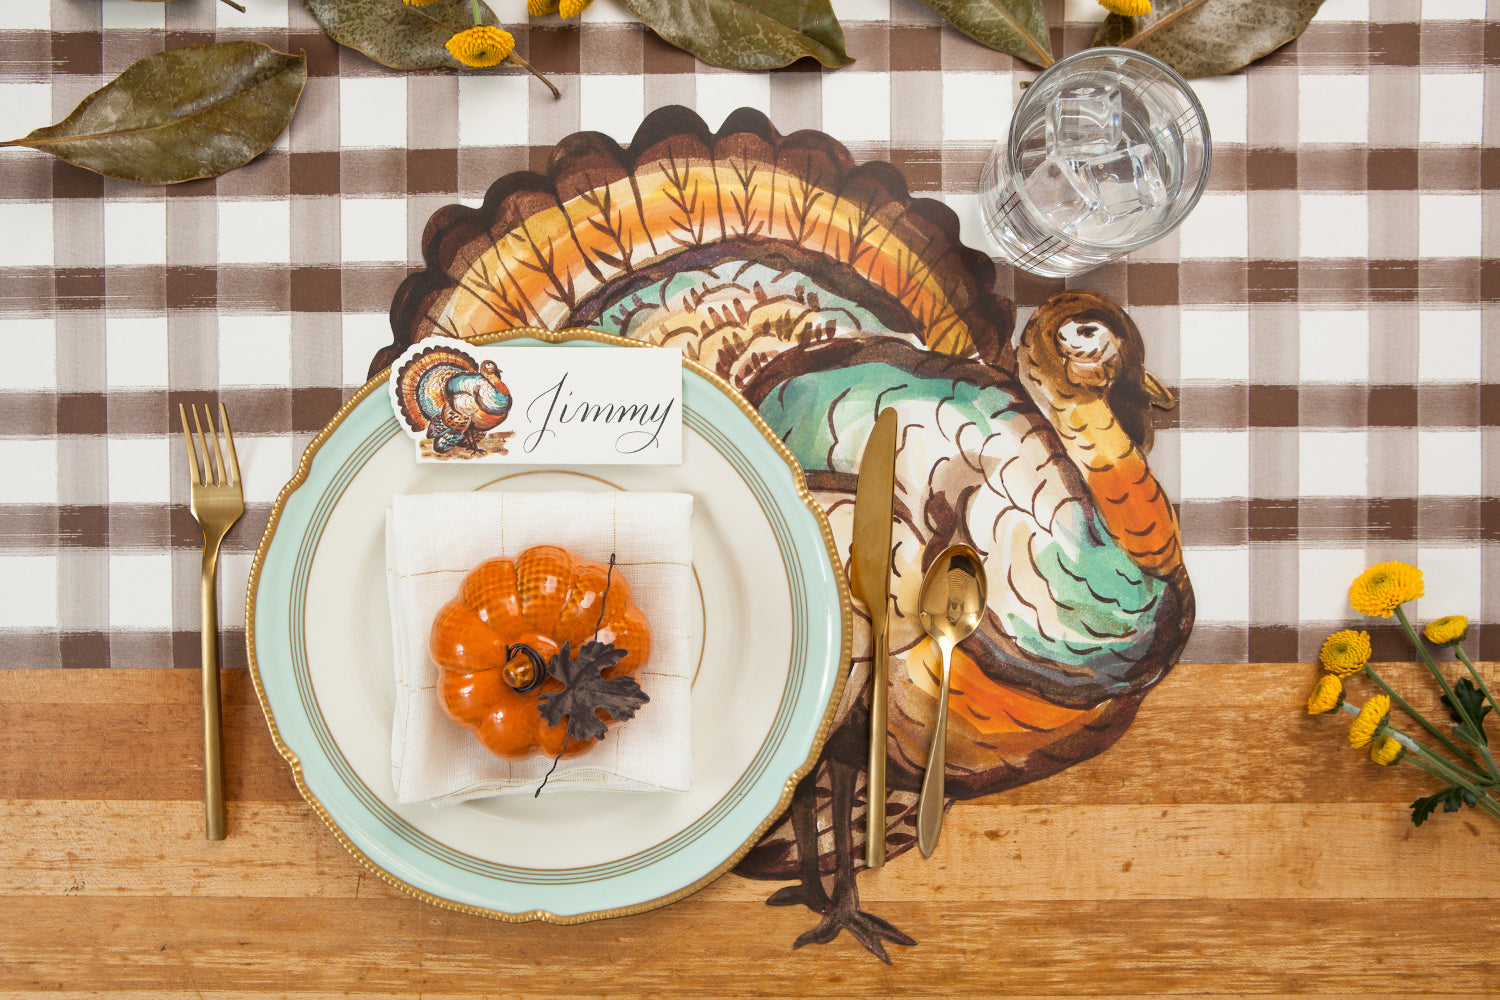 Top-down view of an elegant Thanksgiving place setting featuring a Thanksgiving Turkey Place Card labeled &quot;Jimmy&quot; resting on the plate.